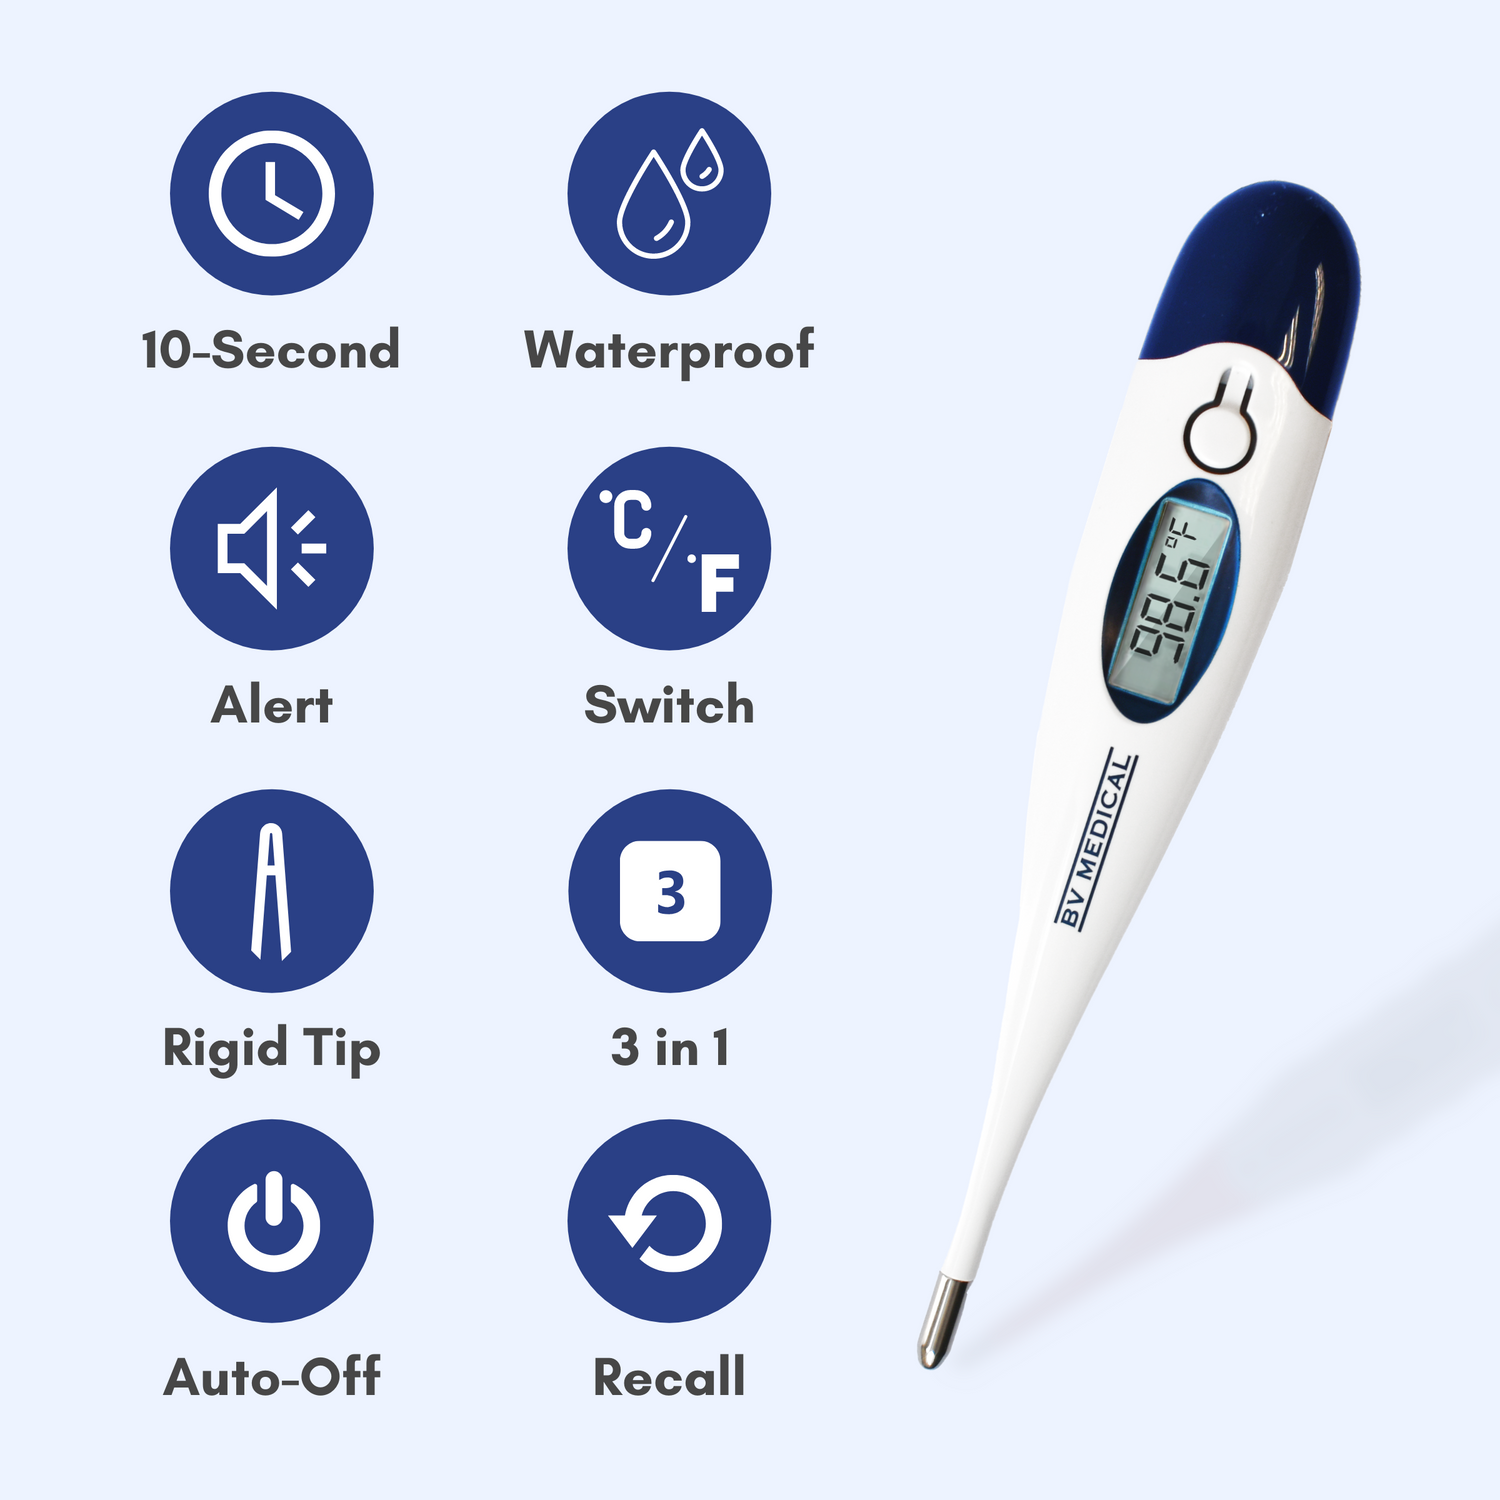 BV Medical Digital Thermometer with 100 Probe Covers